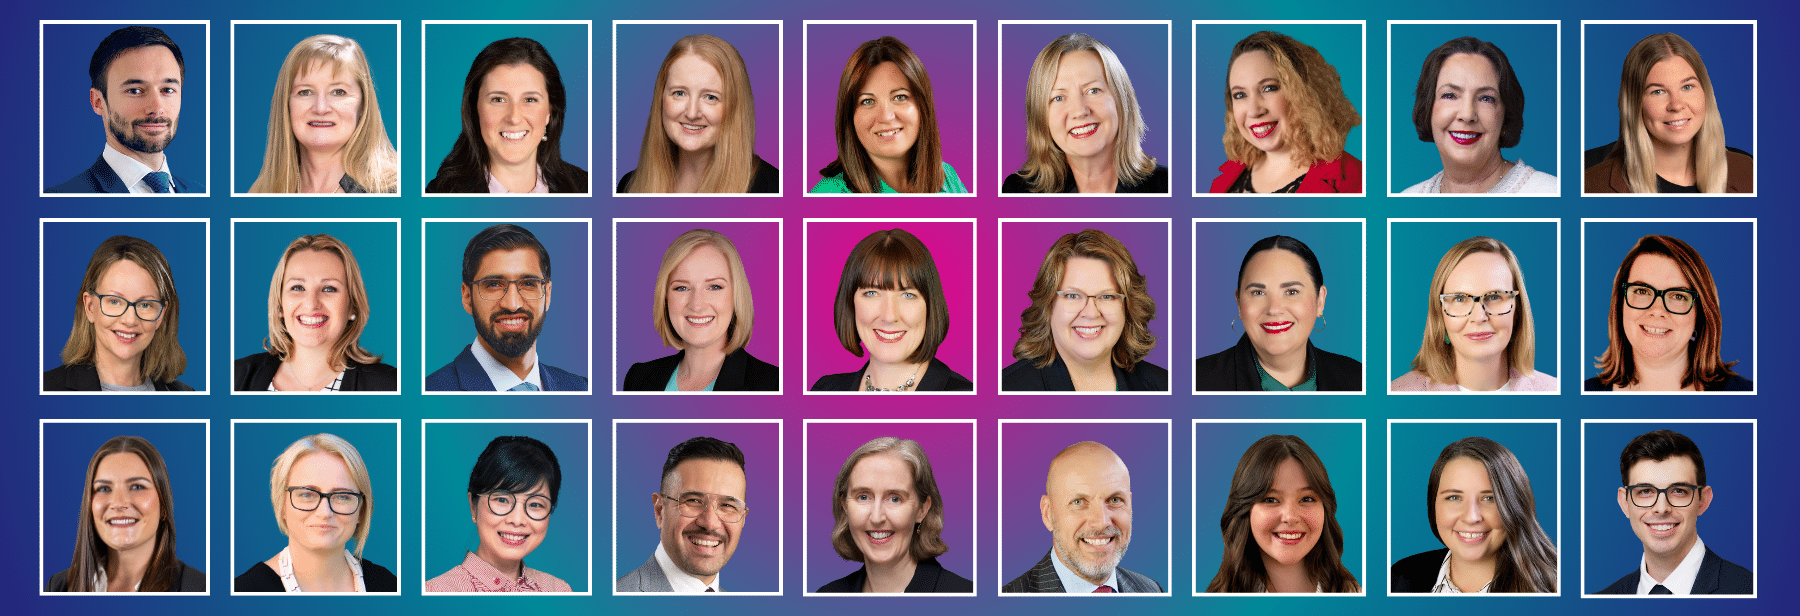 Image of all Pearce IP staff on colourful background